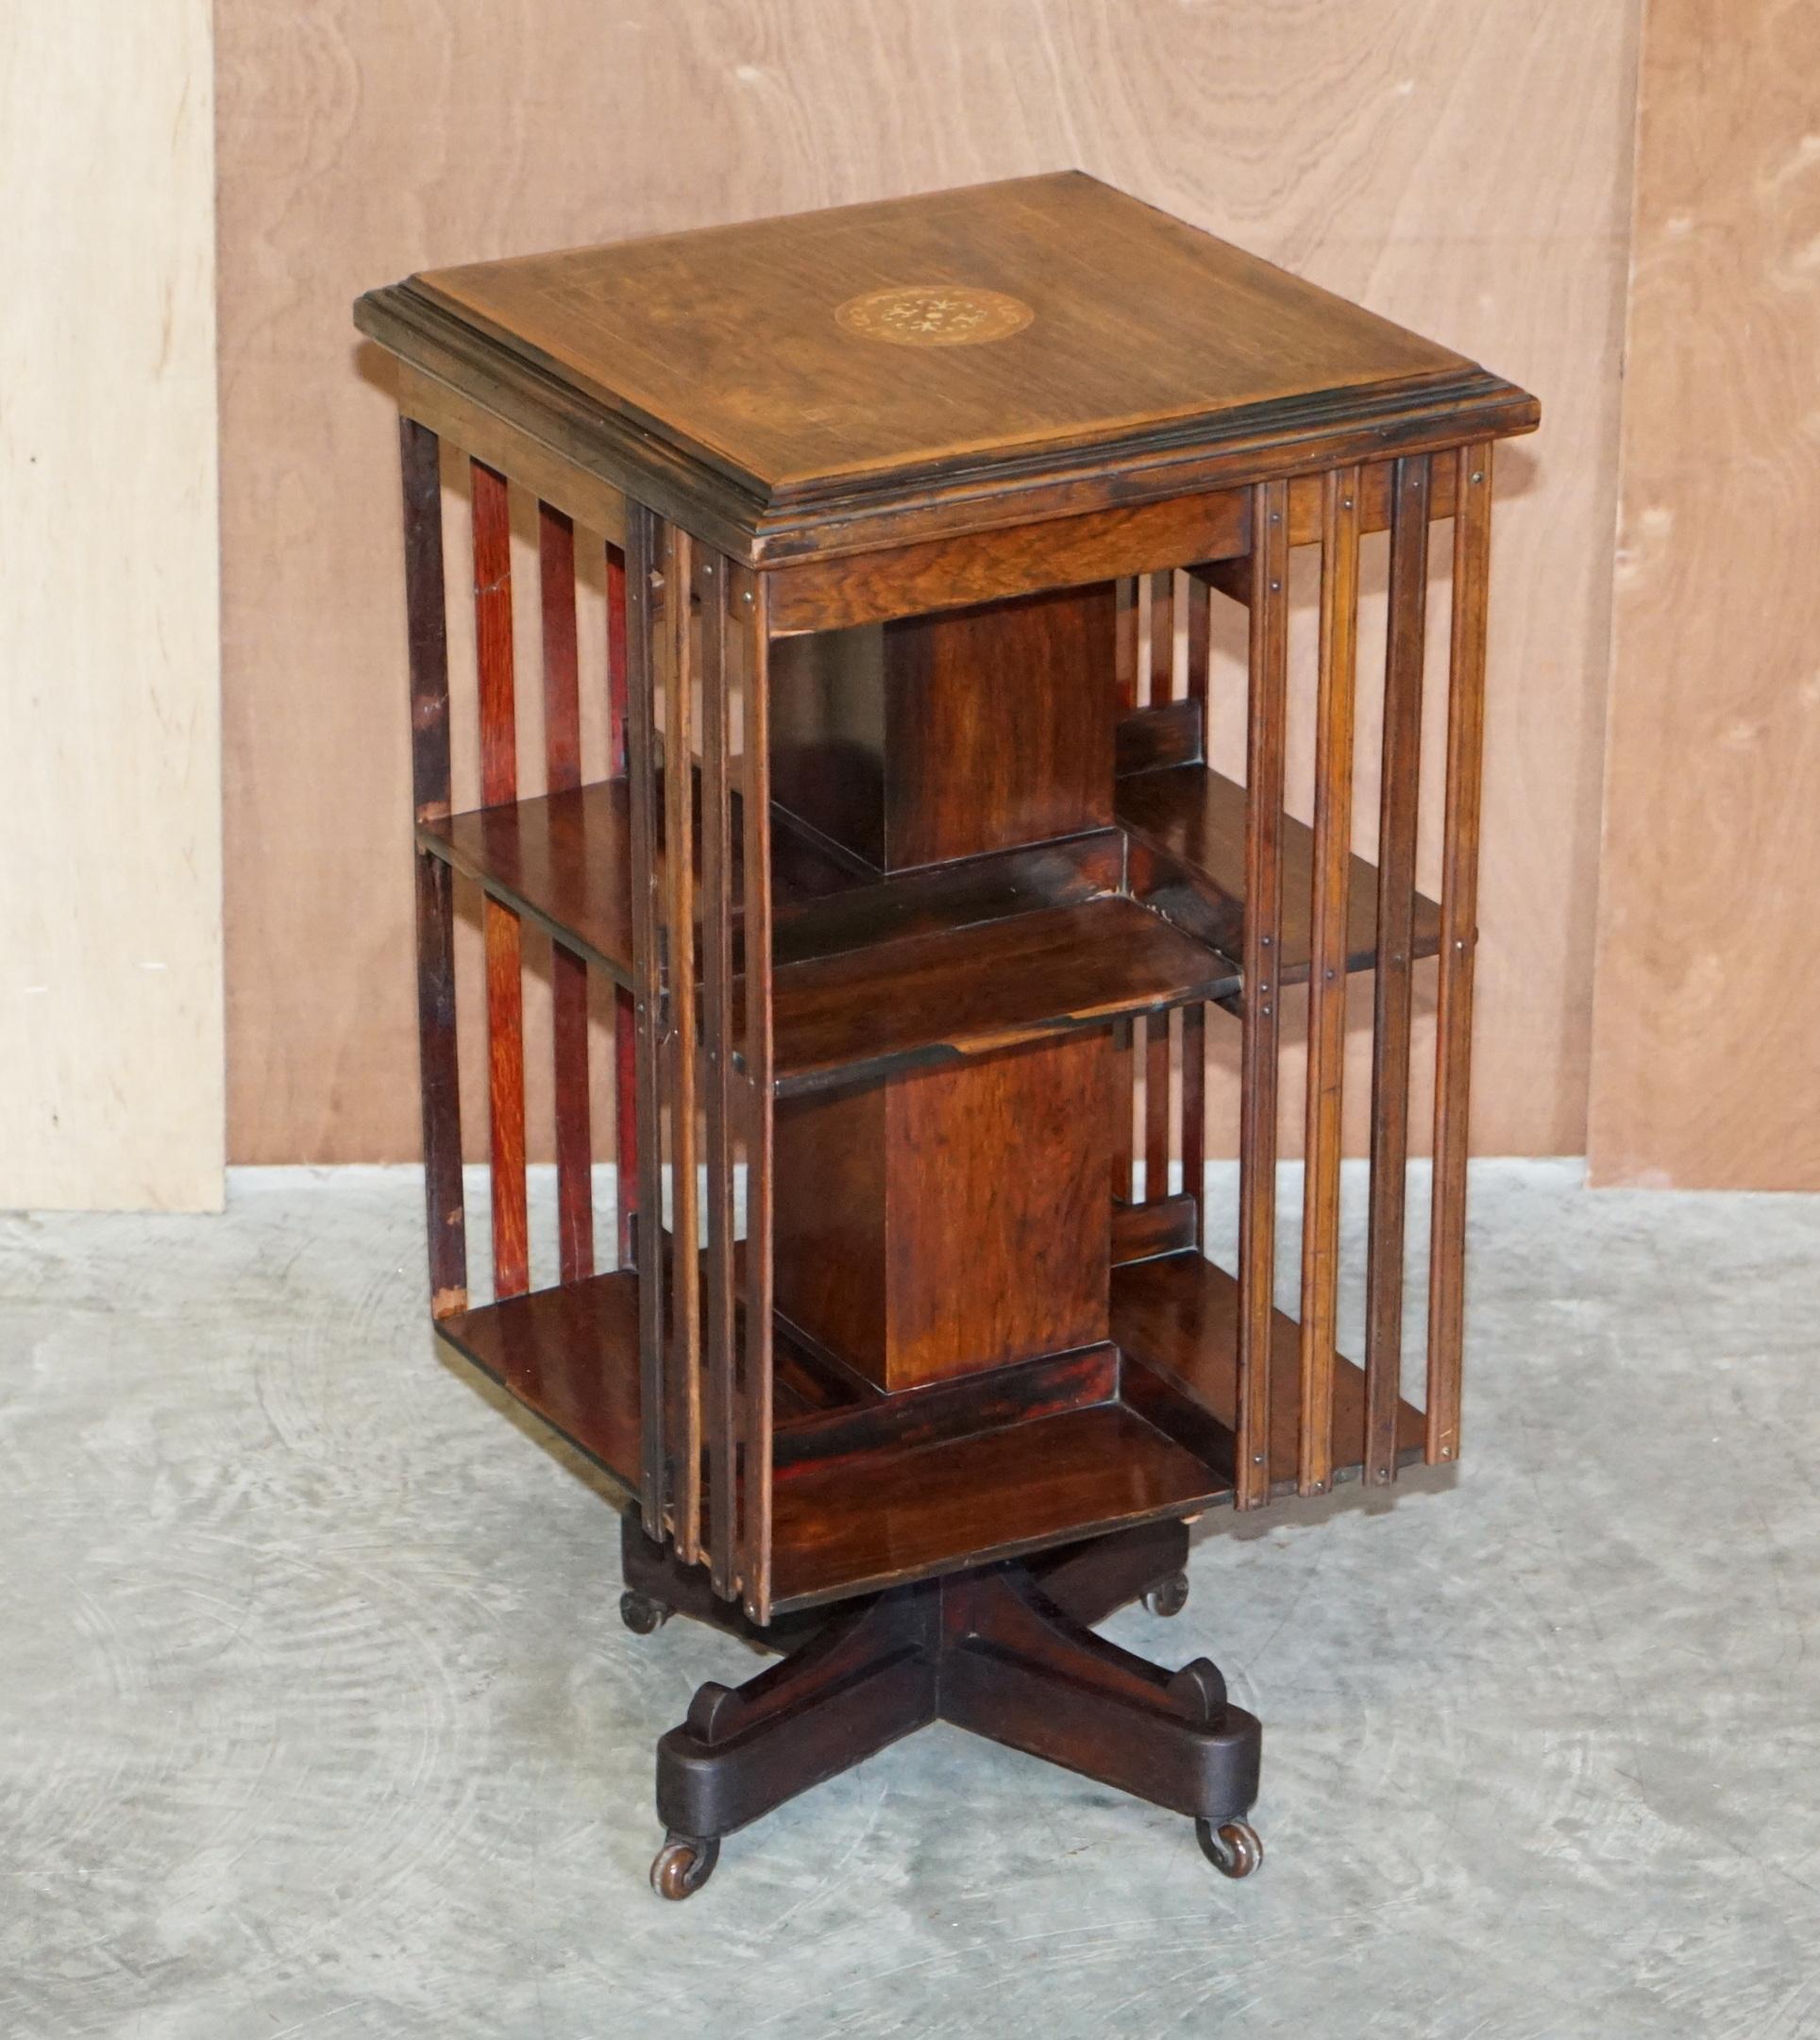 We are delighted to offer for sale this stunning circa 1900 hardwood revolving bookcase with Sheraton inlay to the top.

An exceptionally well made and highly decorative library bookcase or book table. This is a very versatile piece of furniture